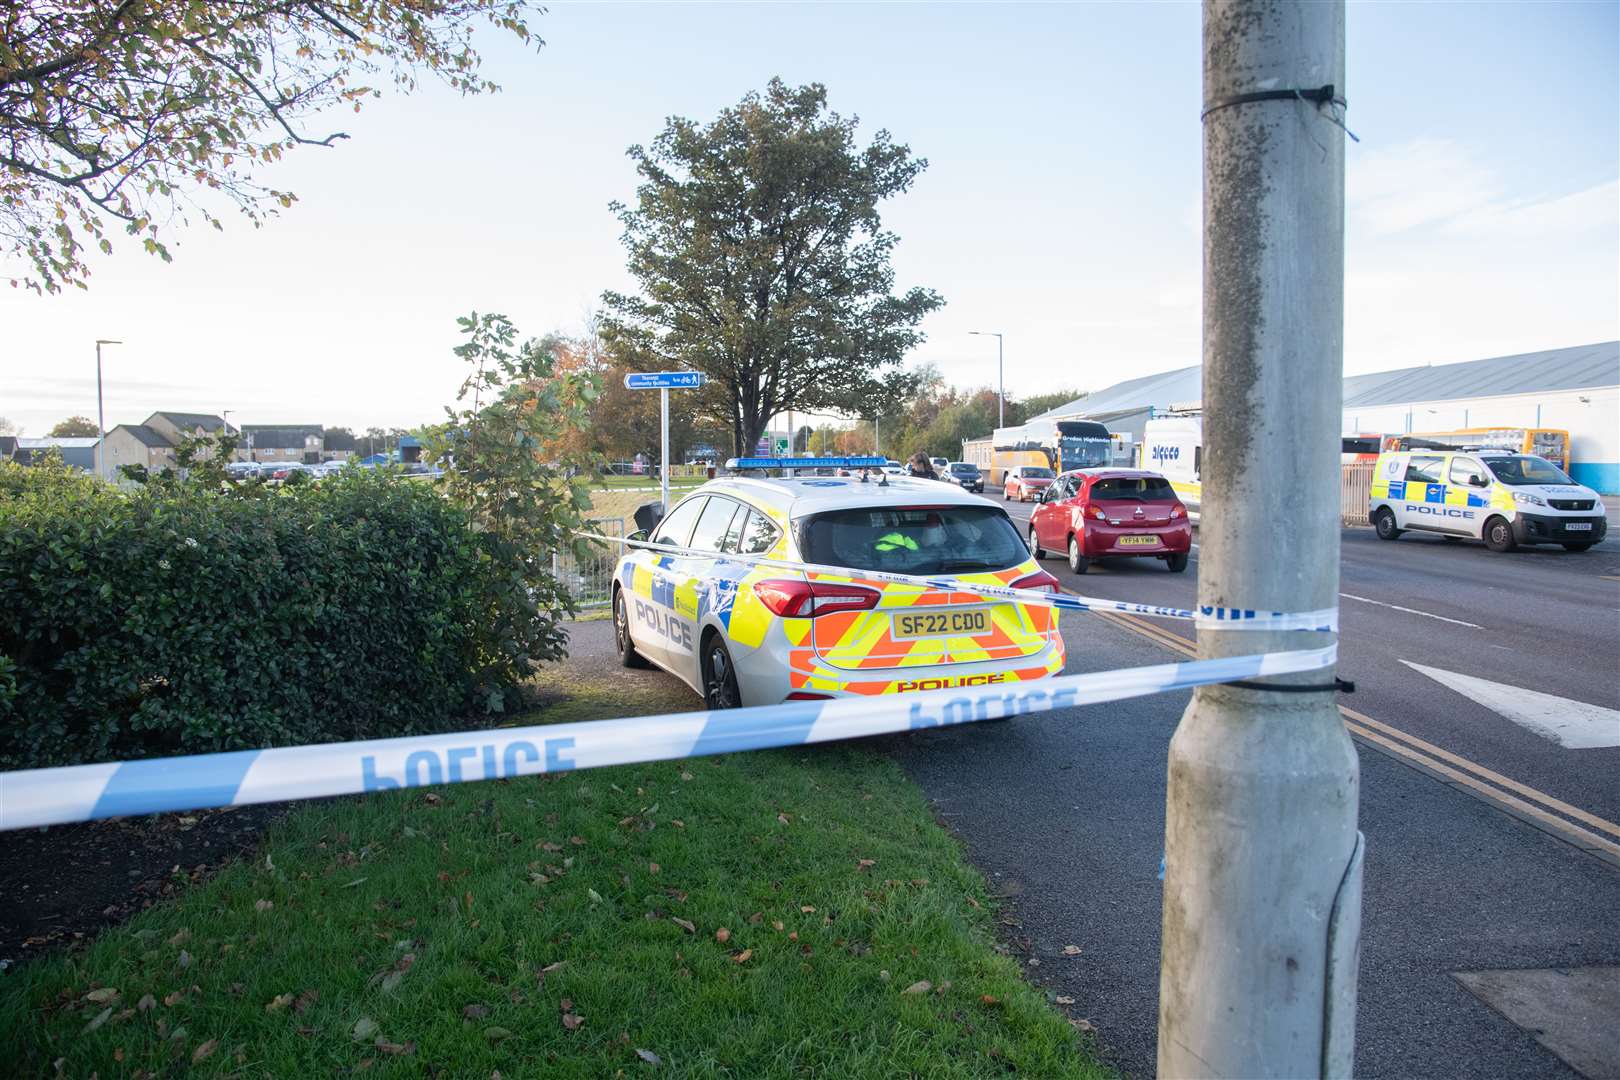 Police remain at the scene at the Tyock Burn in Elgin today (24/10) following the discovery of a body in the water yesterday. ..Picture: Highland News and Media..